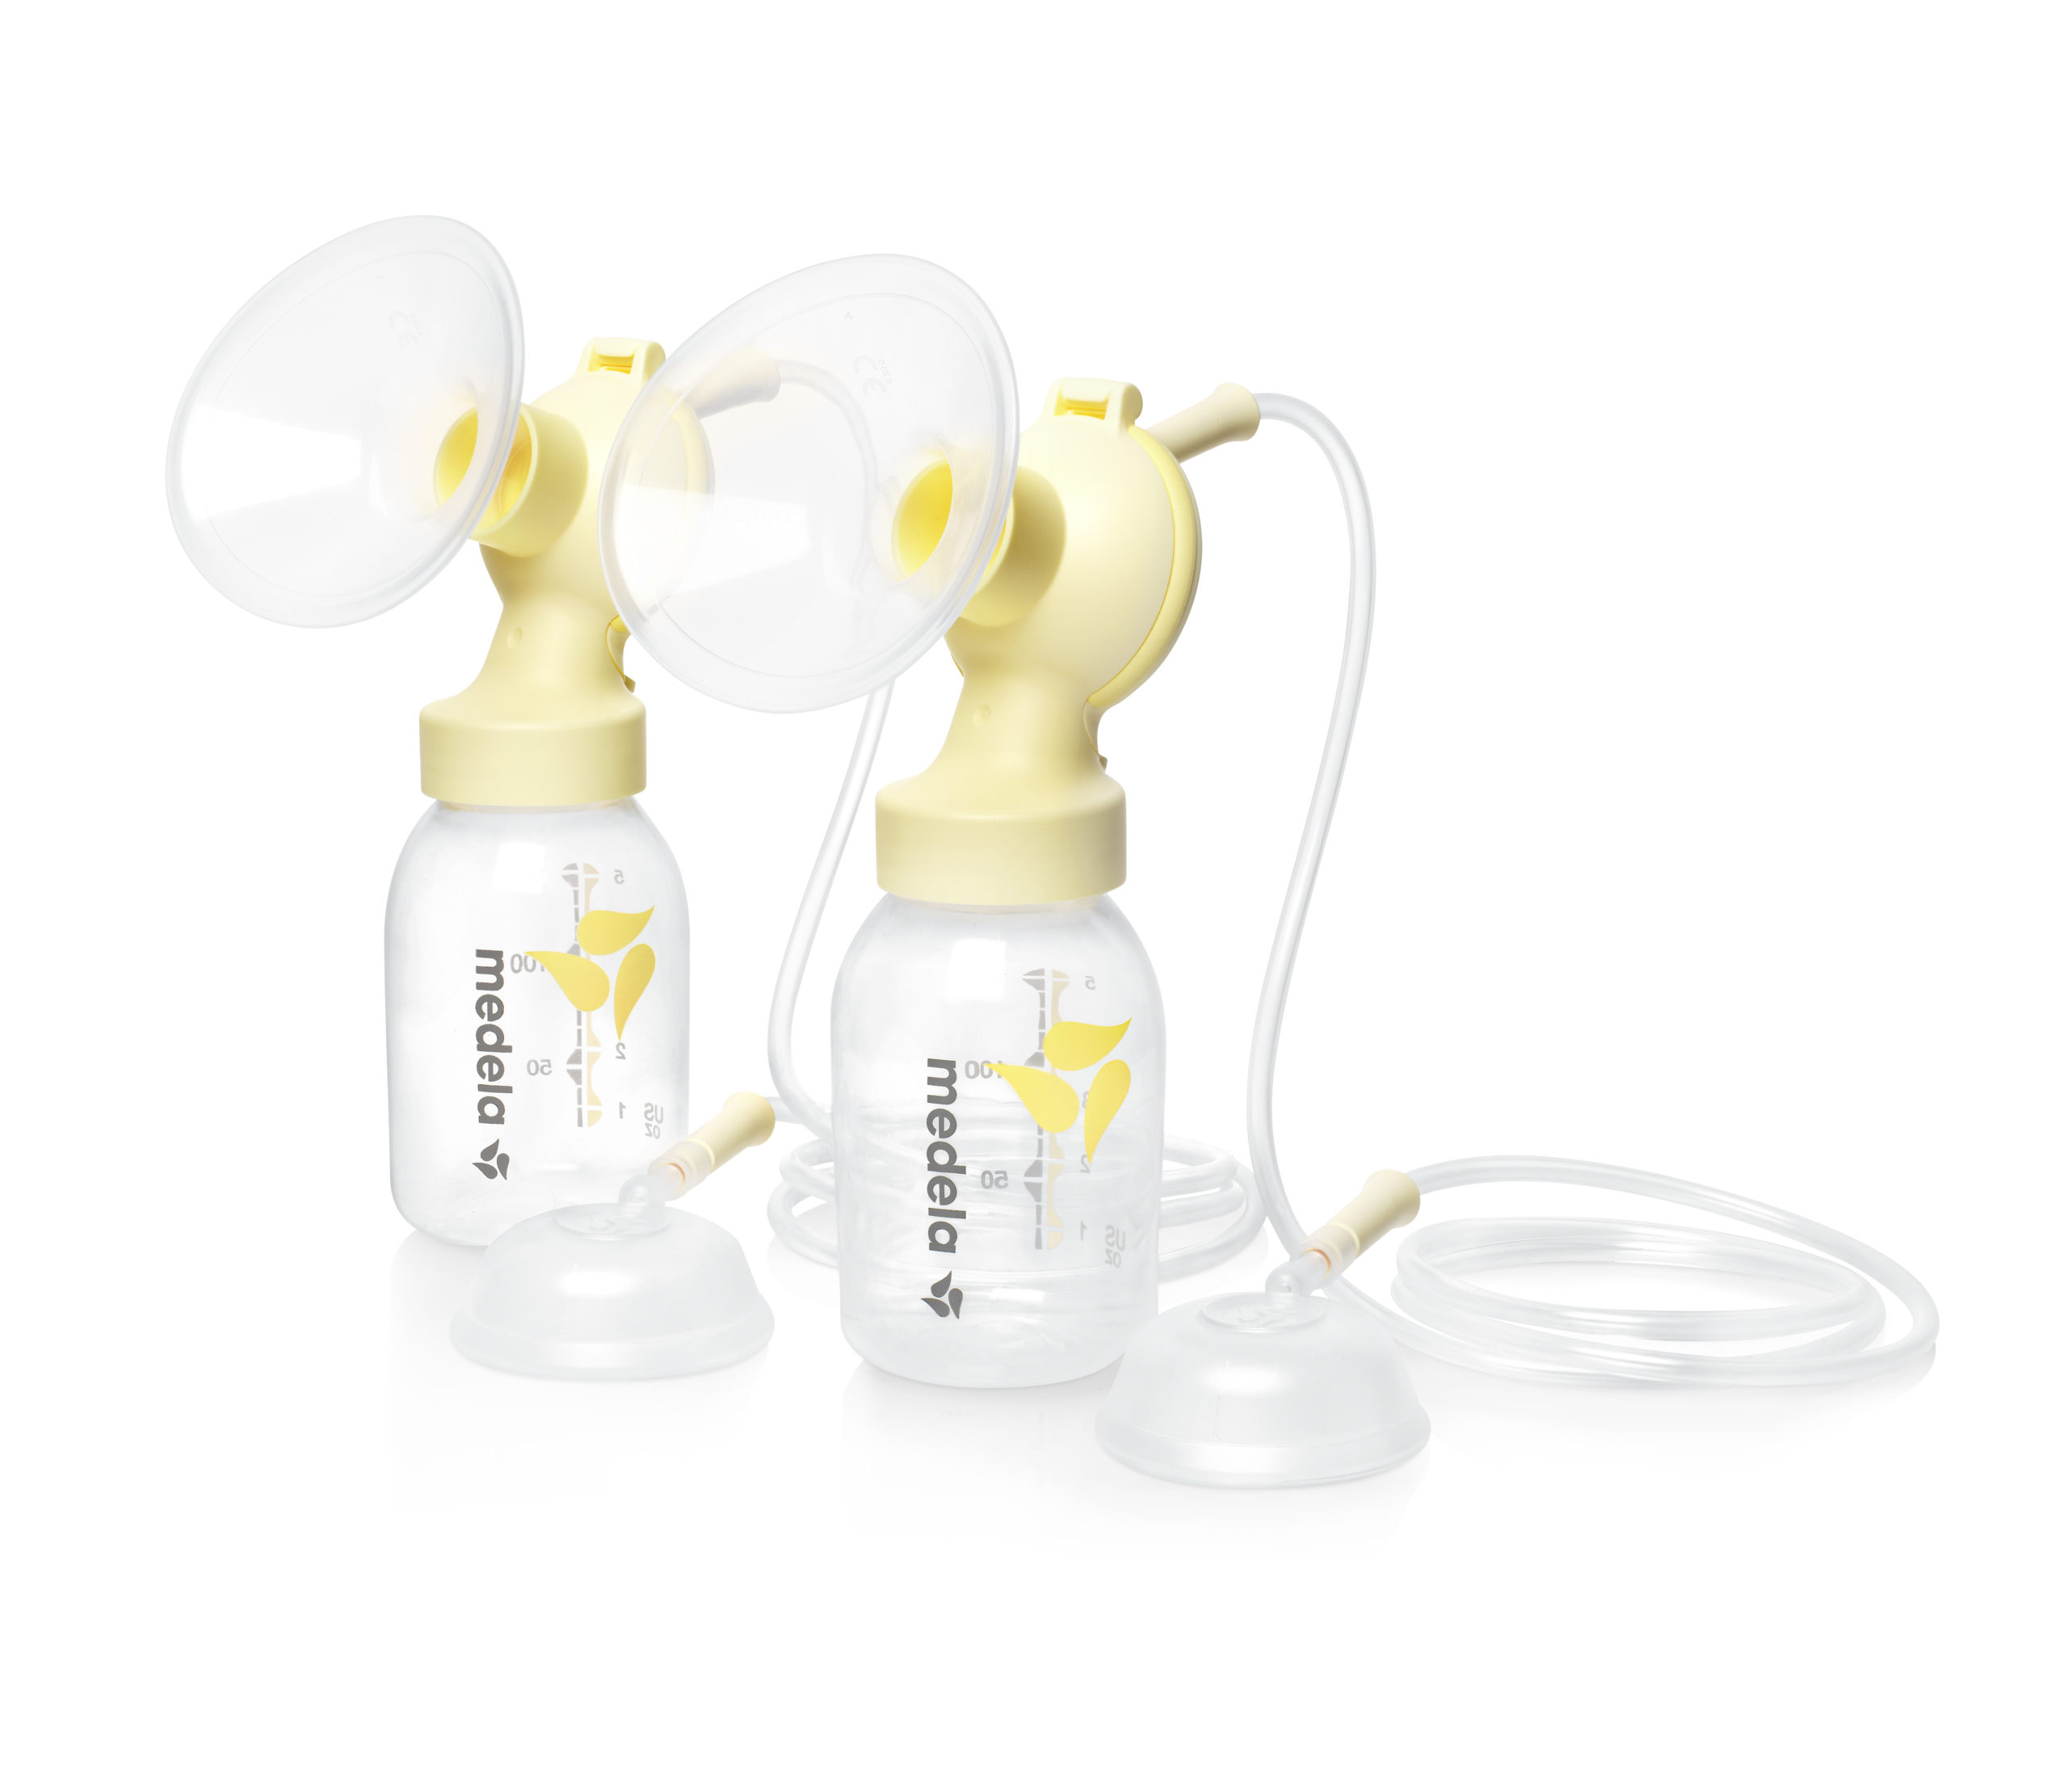 Symphony Double Electric Breast Pump